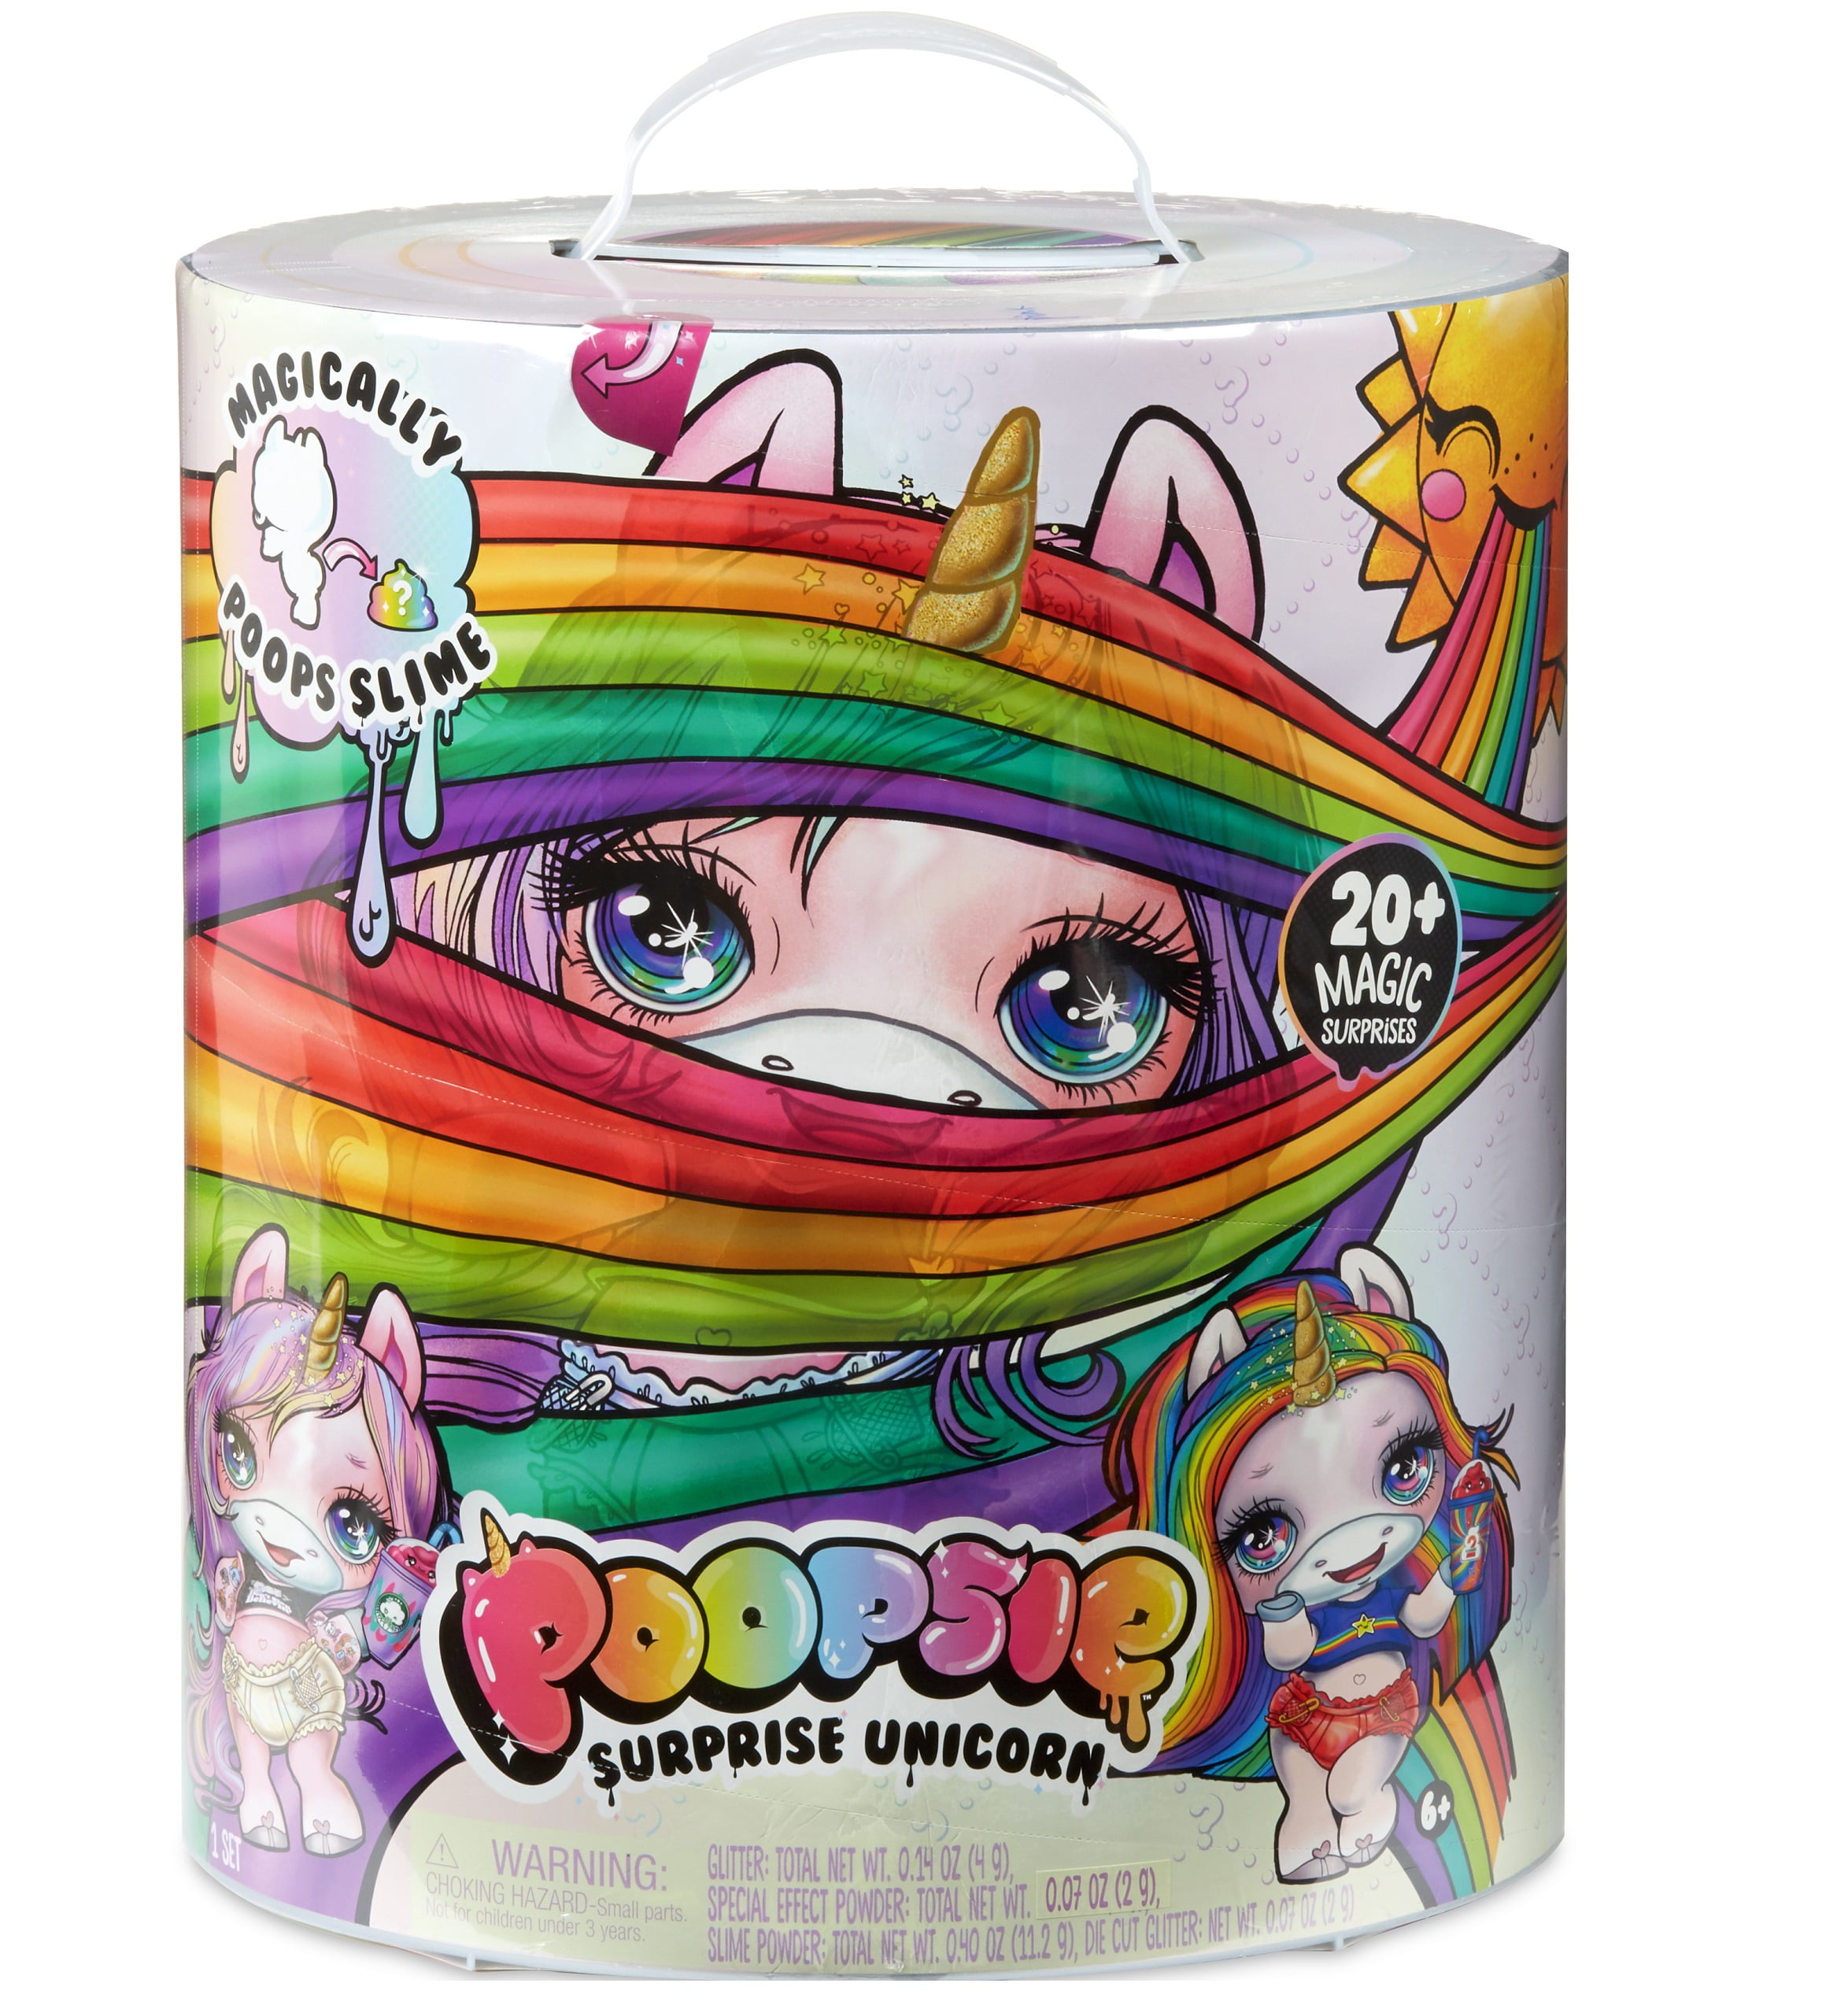 Poopsie Slime Surprise Unicorn Poop Collectable Craft Kit Toy MGA 2018 NEWSealed 